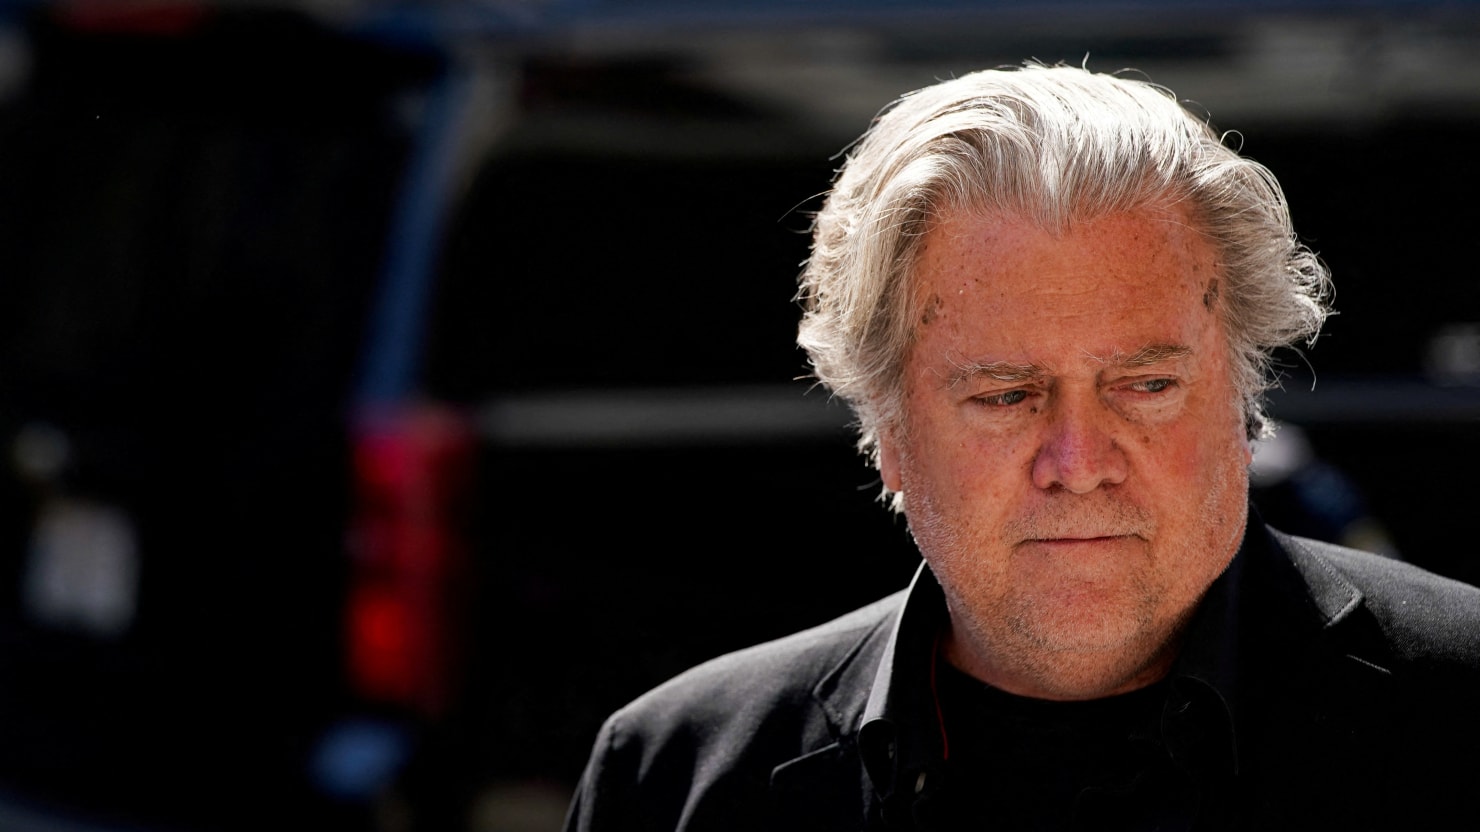 Lawyer’s Bombshell: Trump Never ever Bothered to Invoke Executive Privilege for Steve Bannon